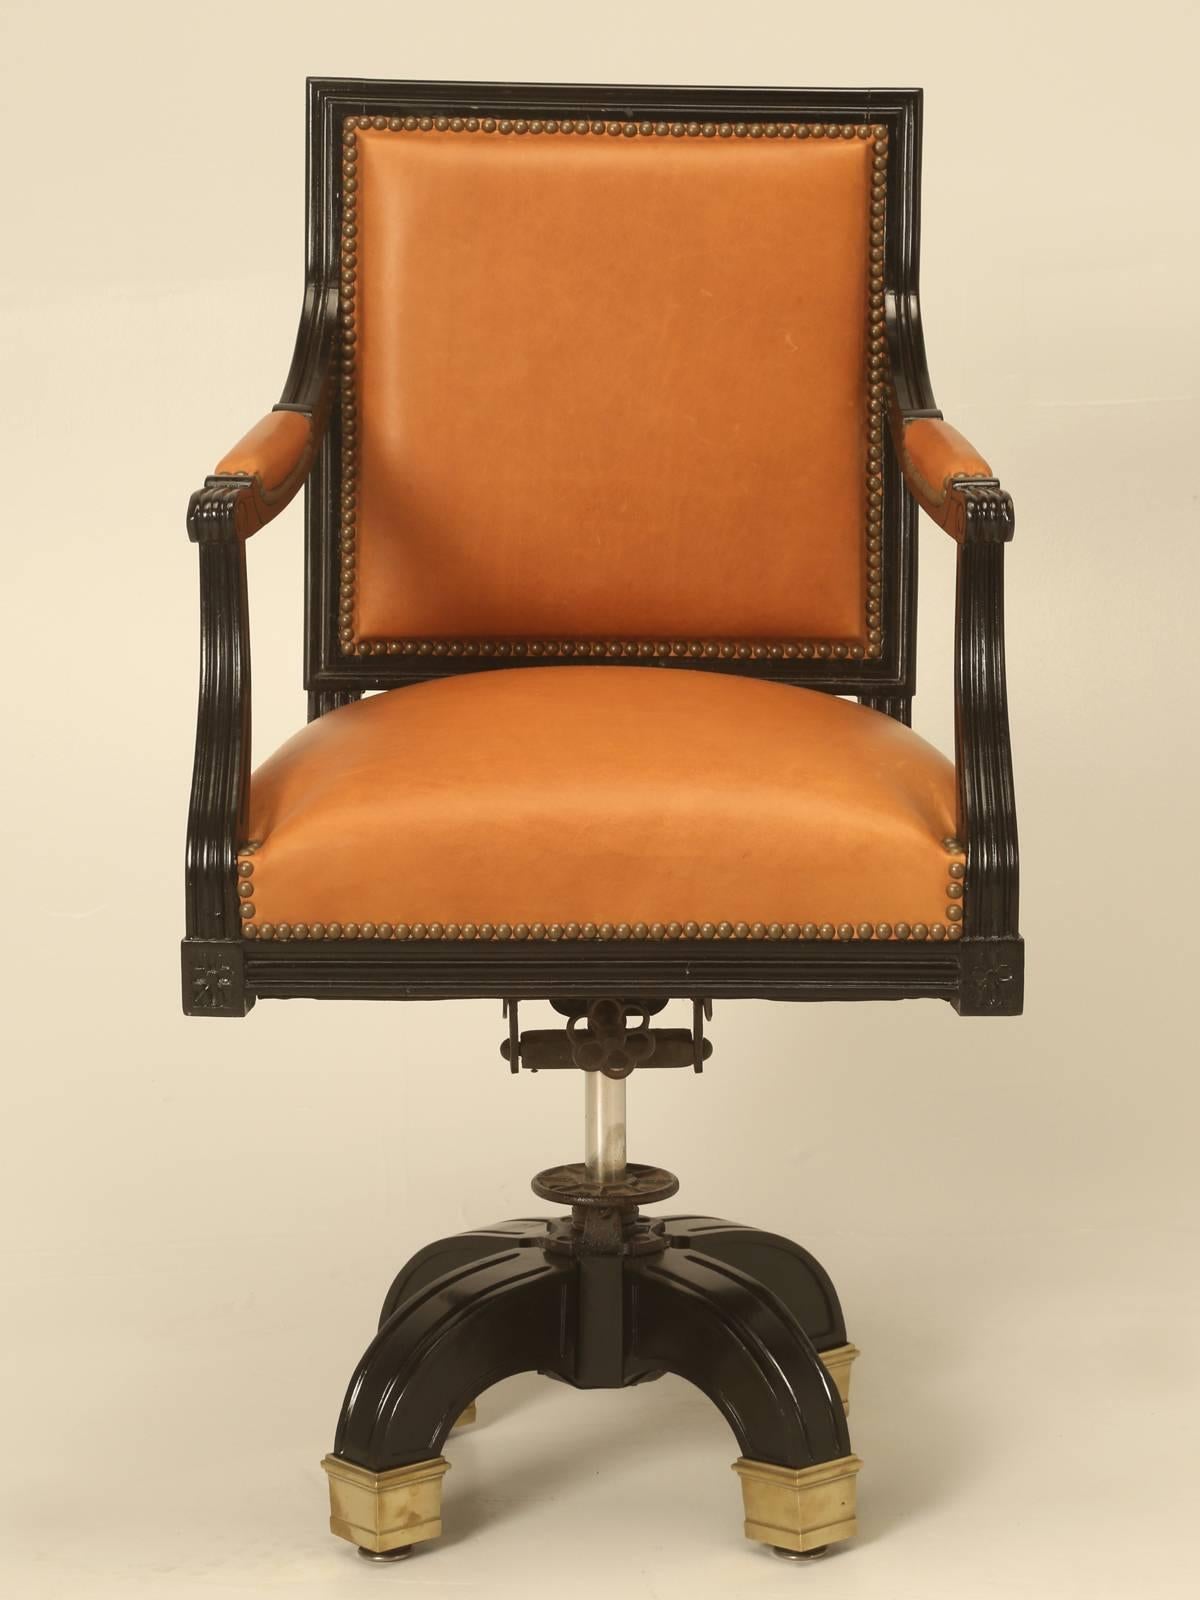 Vintage French Louis XVI style desk chair, done in an authentic French ebonized finish. The upholstery was just restored with glove soft leather imported from Italy, complete with old fashion horsehair padding, which lasts almost forever.